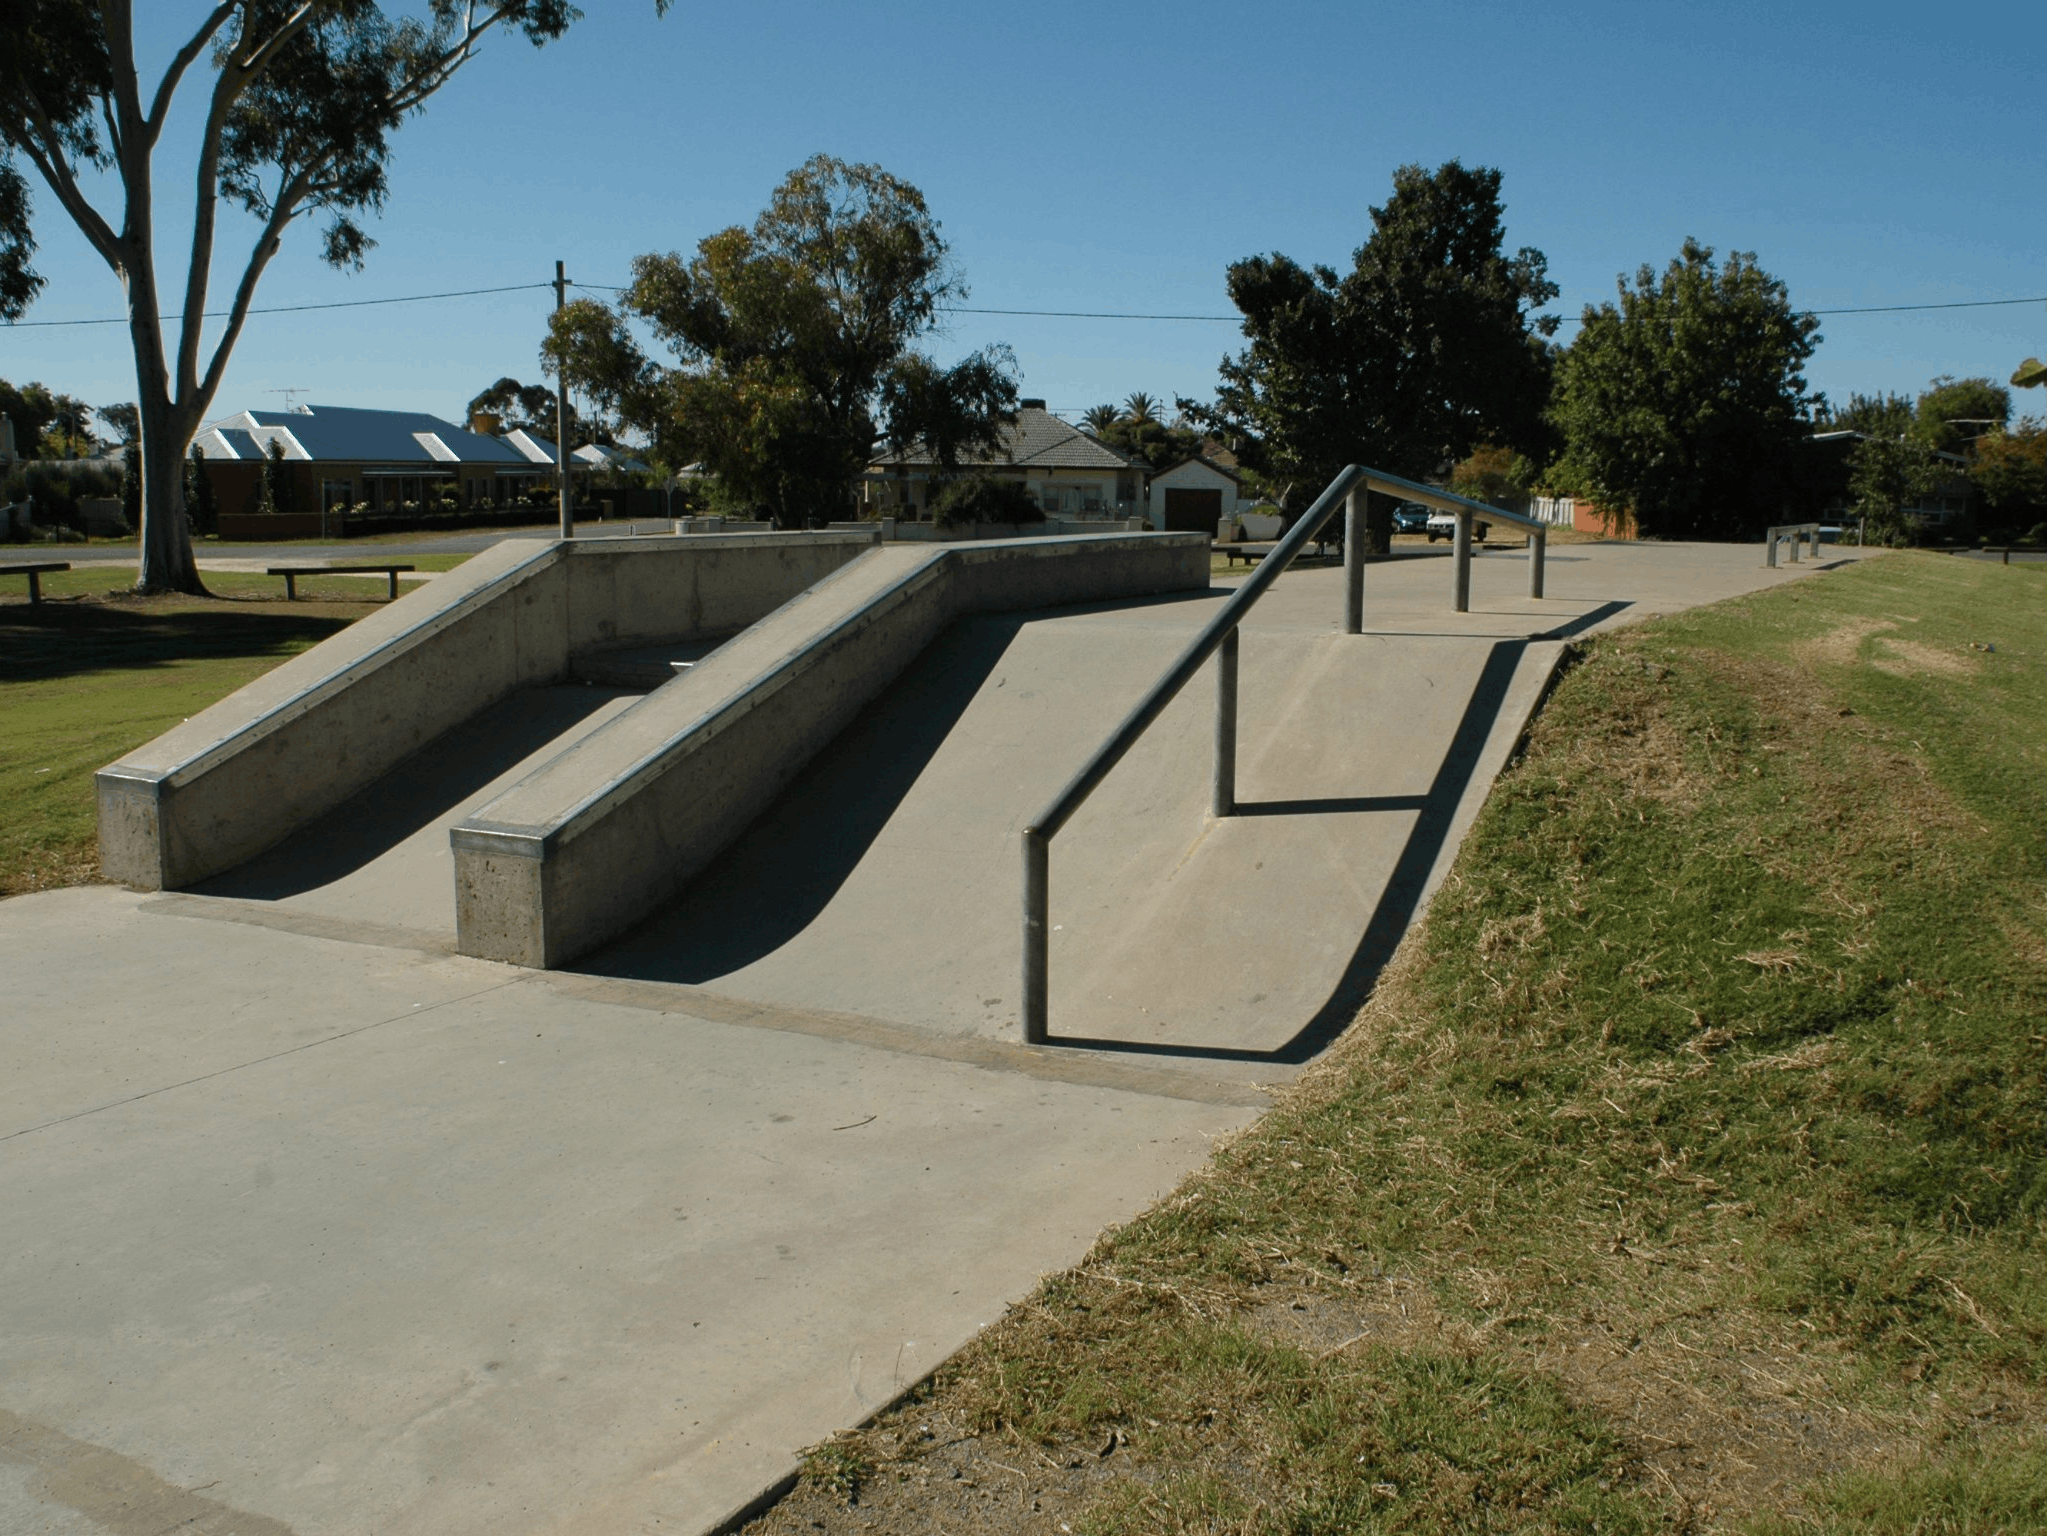 Skate park which is at the Rutherglen Apex Park